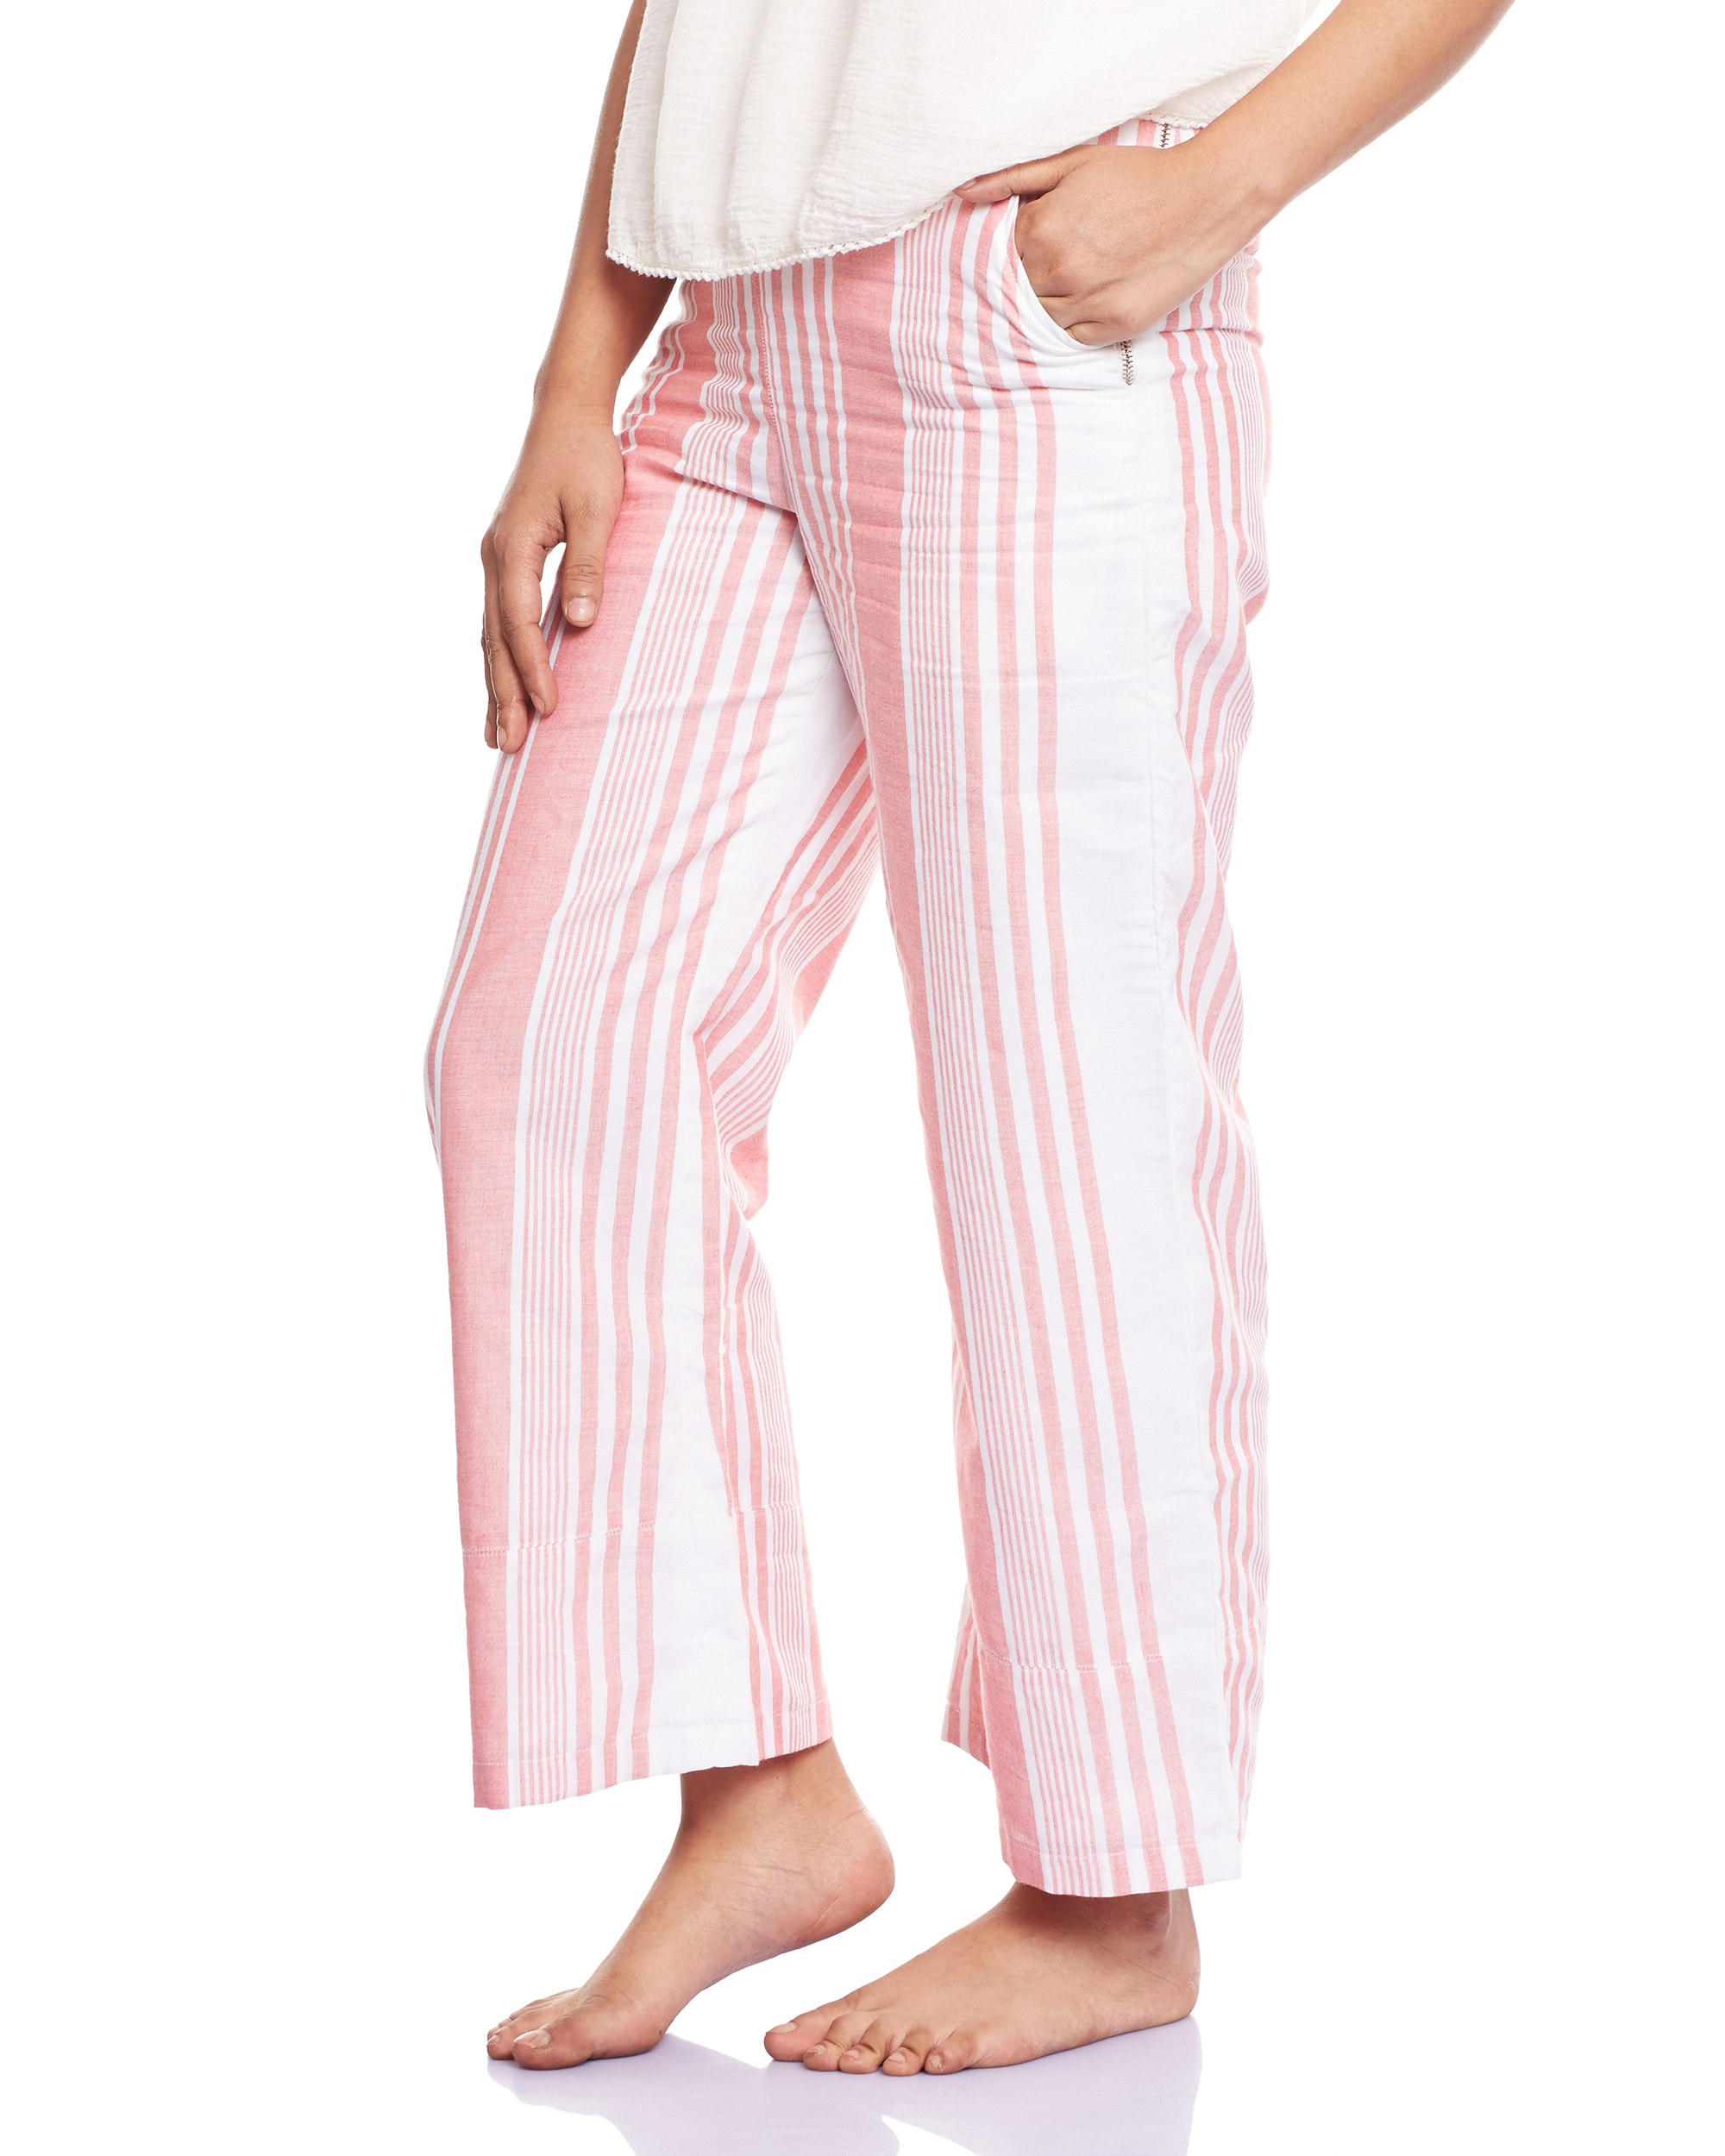 Striped pink culottes by Bhava | The Secret Label